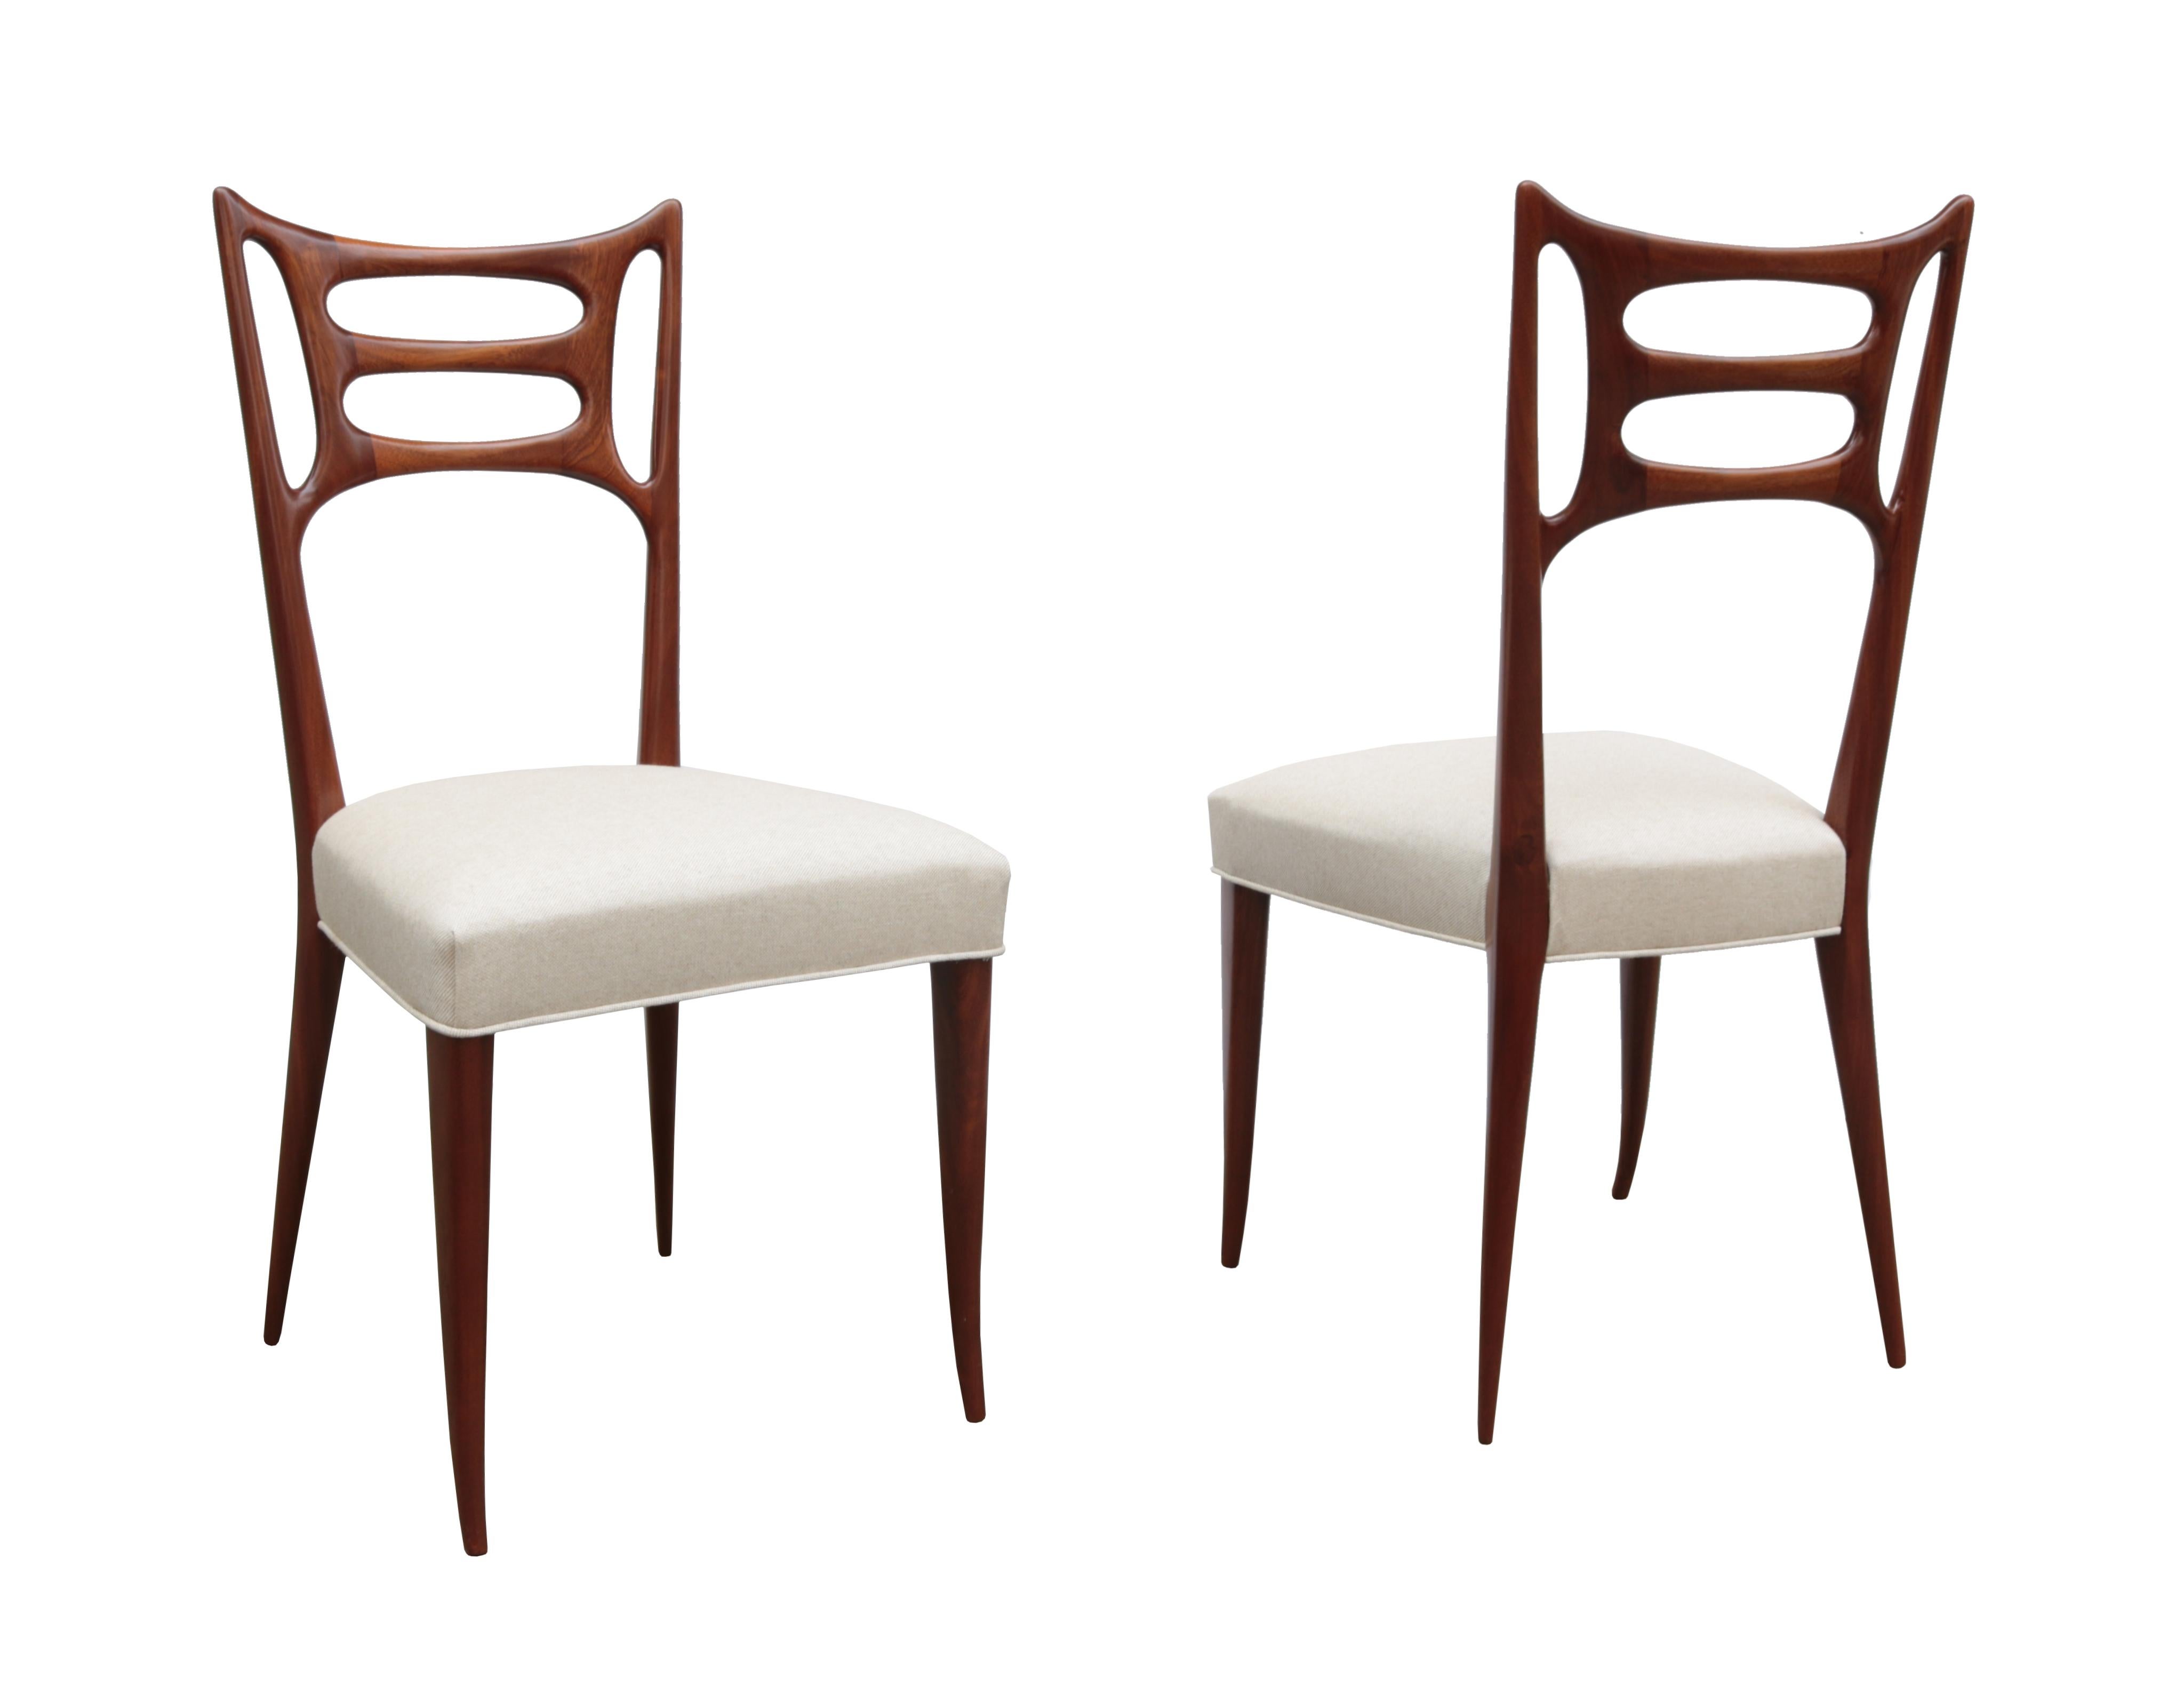 Set of Six Italian Modernist dining chairs
Walnut back and legs with upholstered seat.